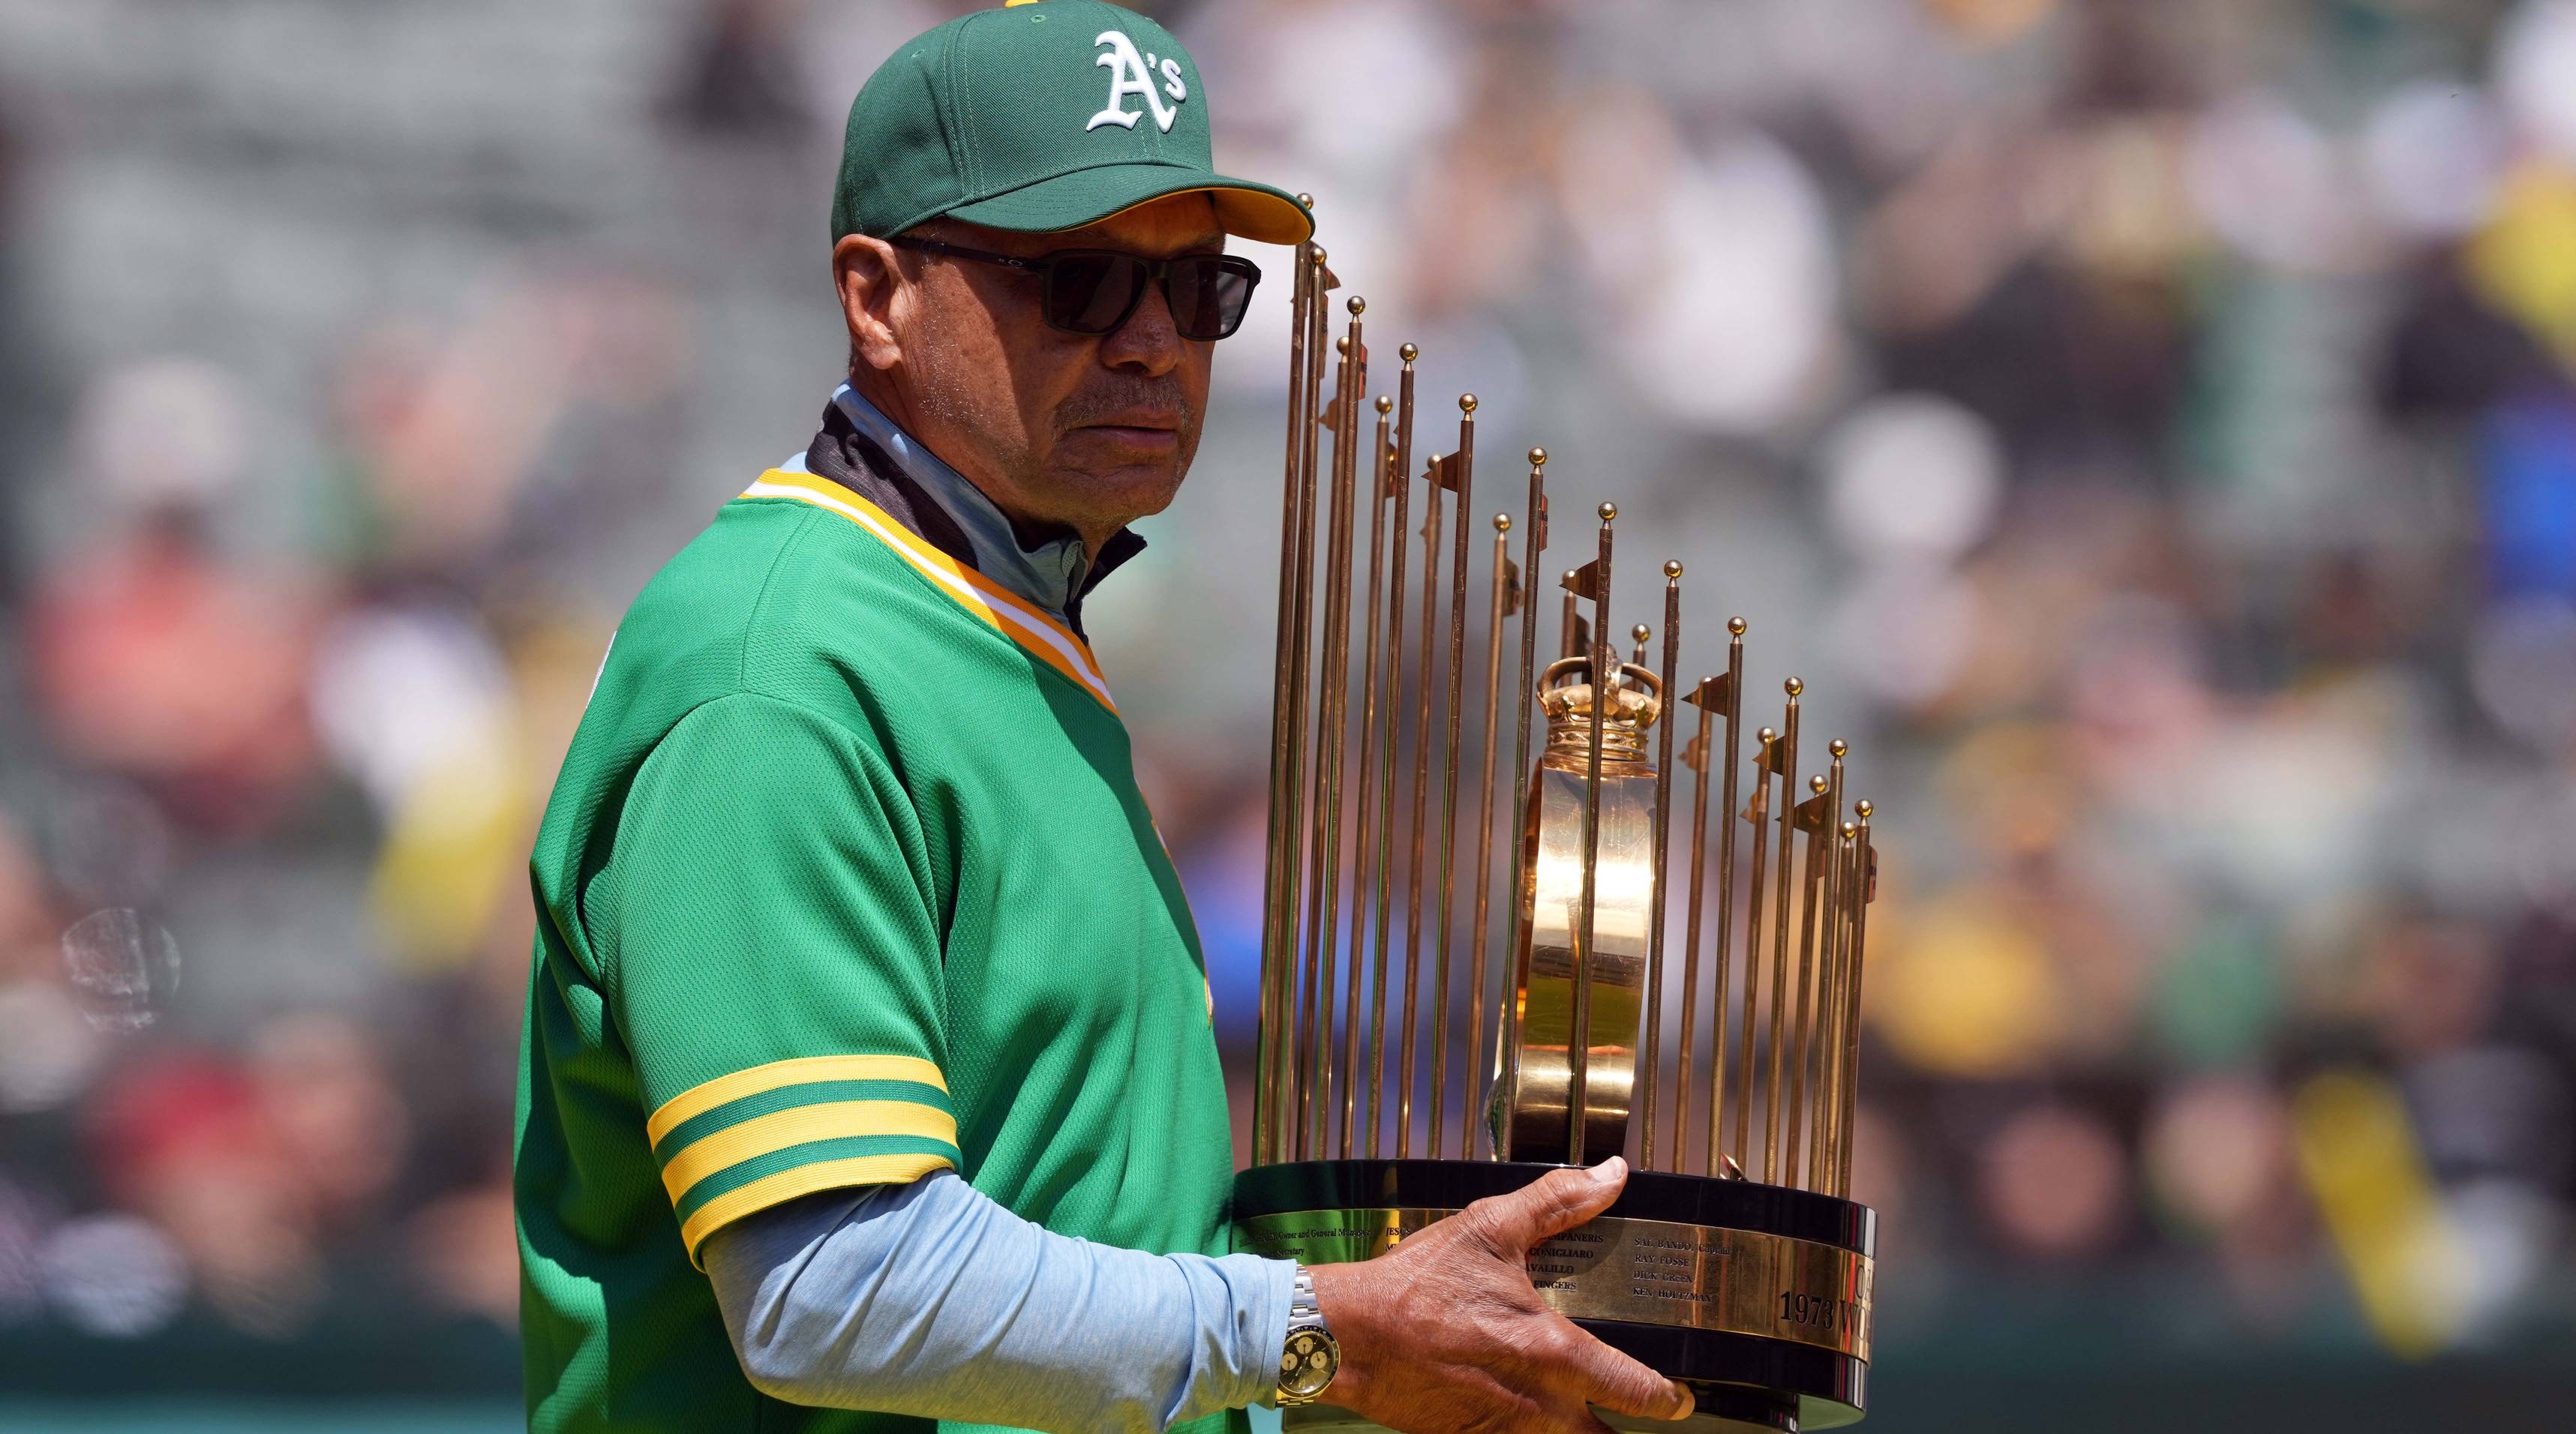 Reggie Jackson shares his doubts about A's future in Oakland